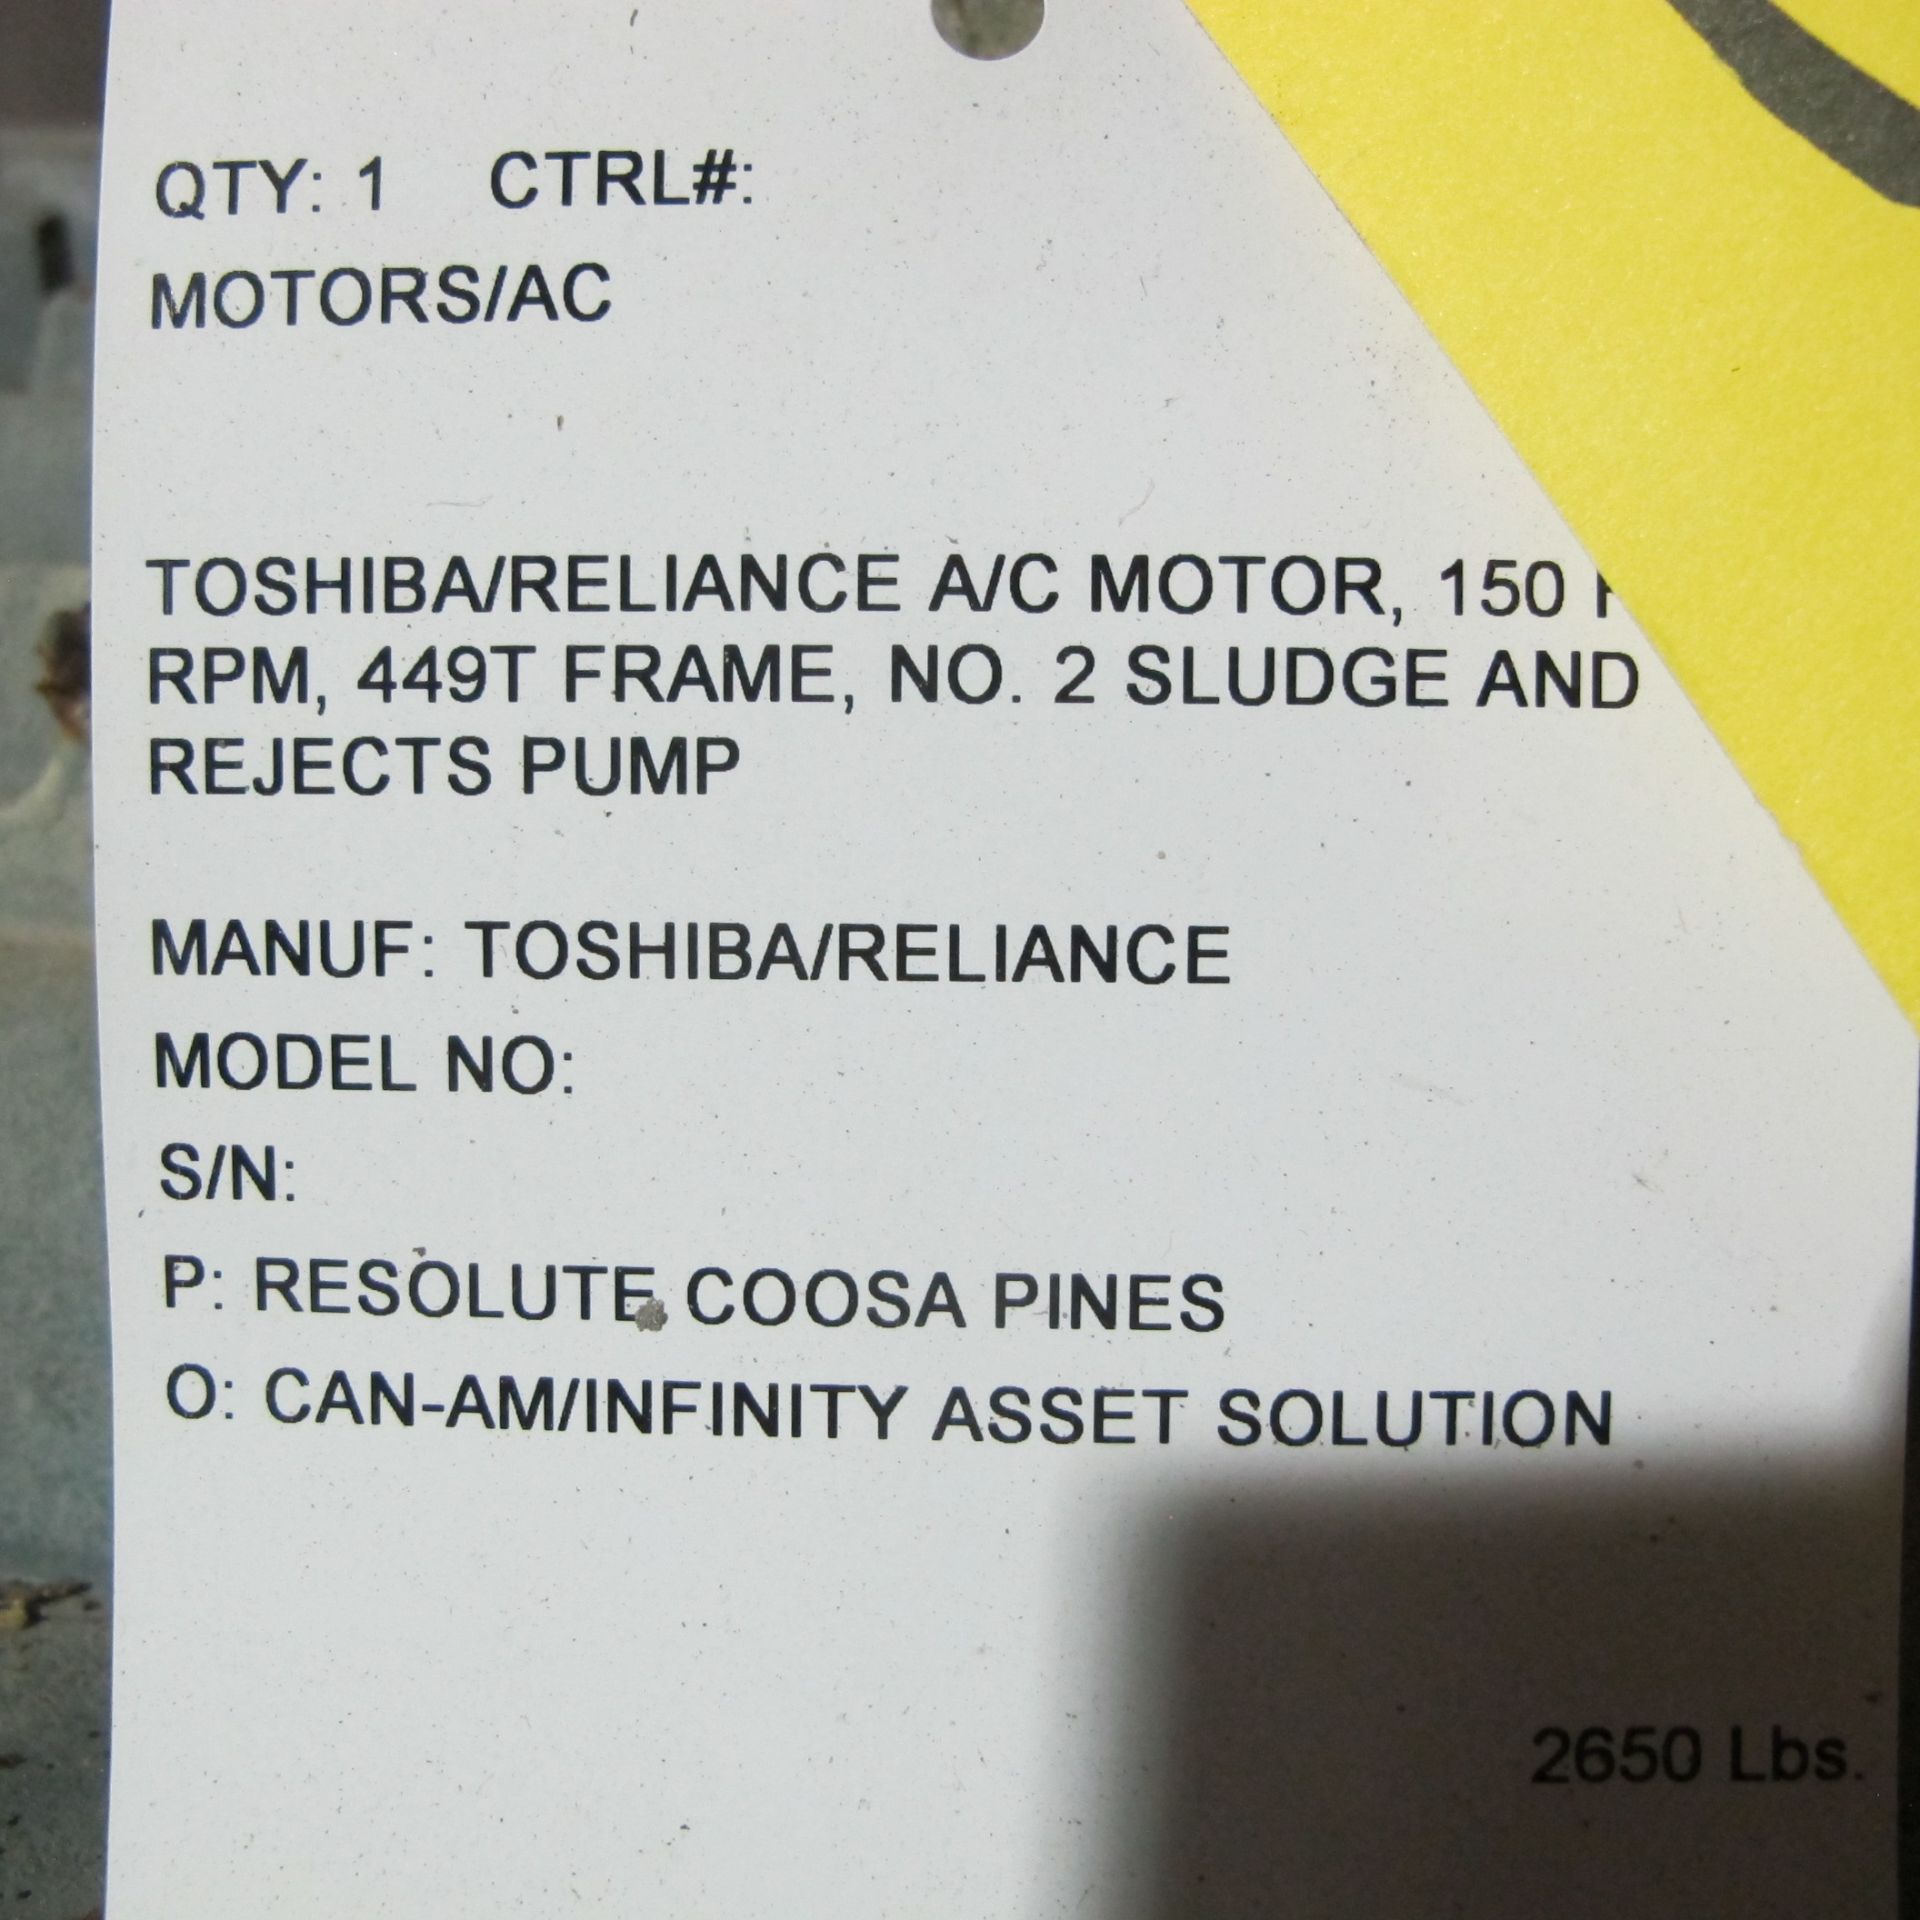 TOSHIBA/RELIANCE A/C MOTOR, 150HP, 710 RPM, 449T FRAME, NO. 2 SLUDGE AND REJECTS PUMP, 2,650LBS ( - Image 3 of 3